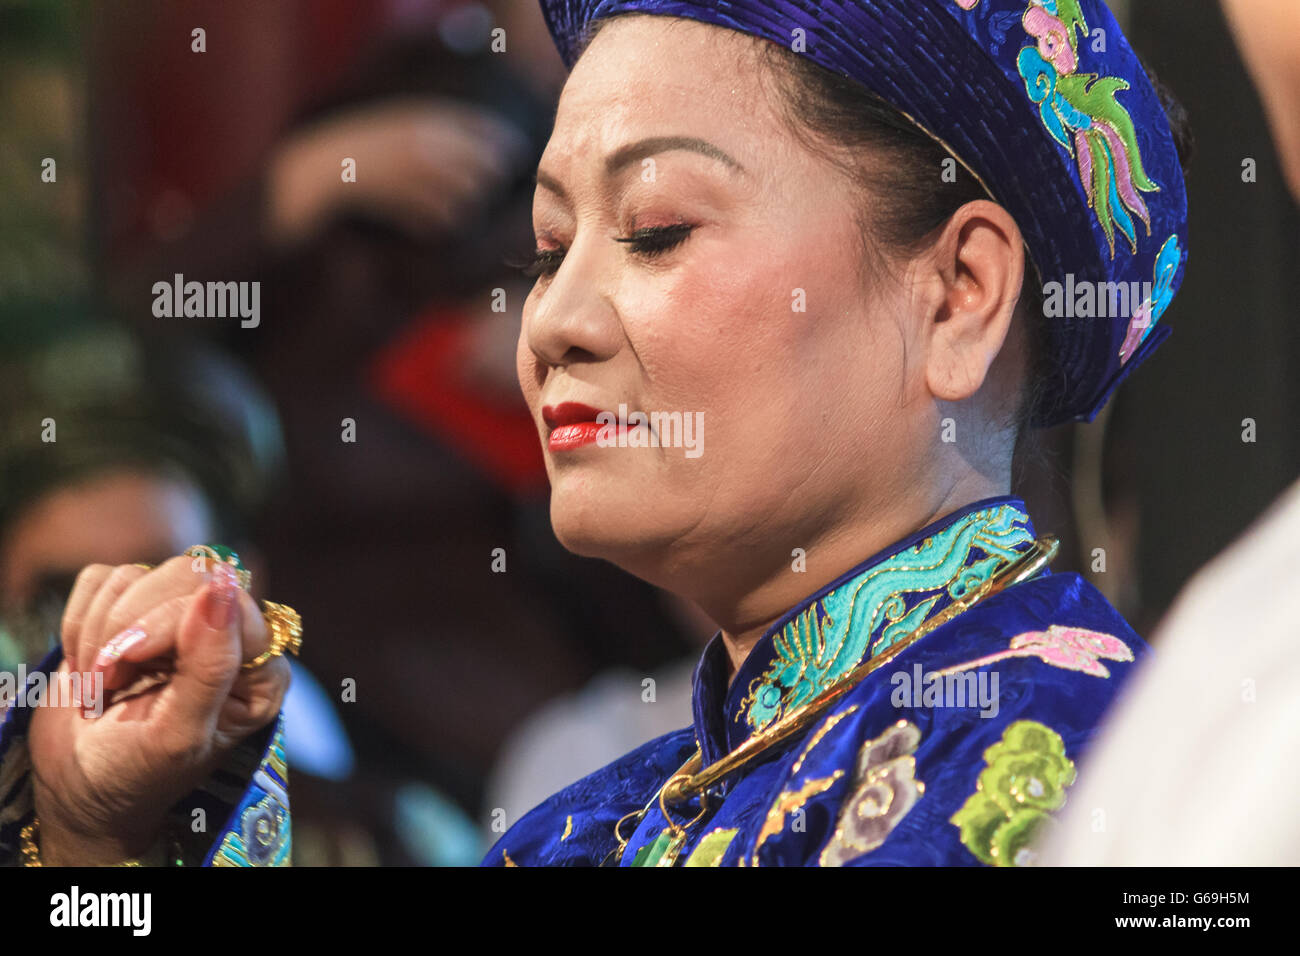 A female medium is dressed up and about to perform Len Dong, a spirit mediumship ritual in Central Vietnam. Stock Photo